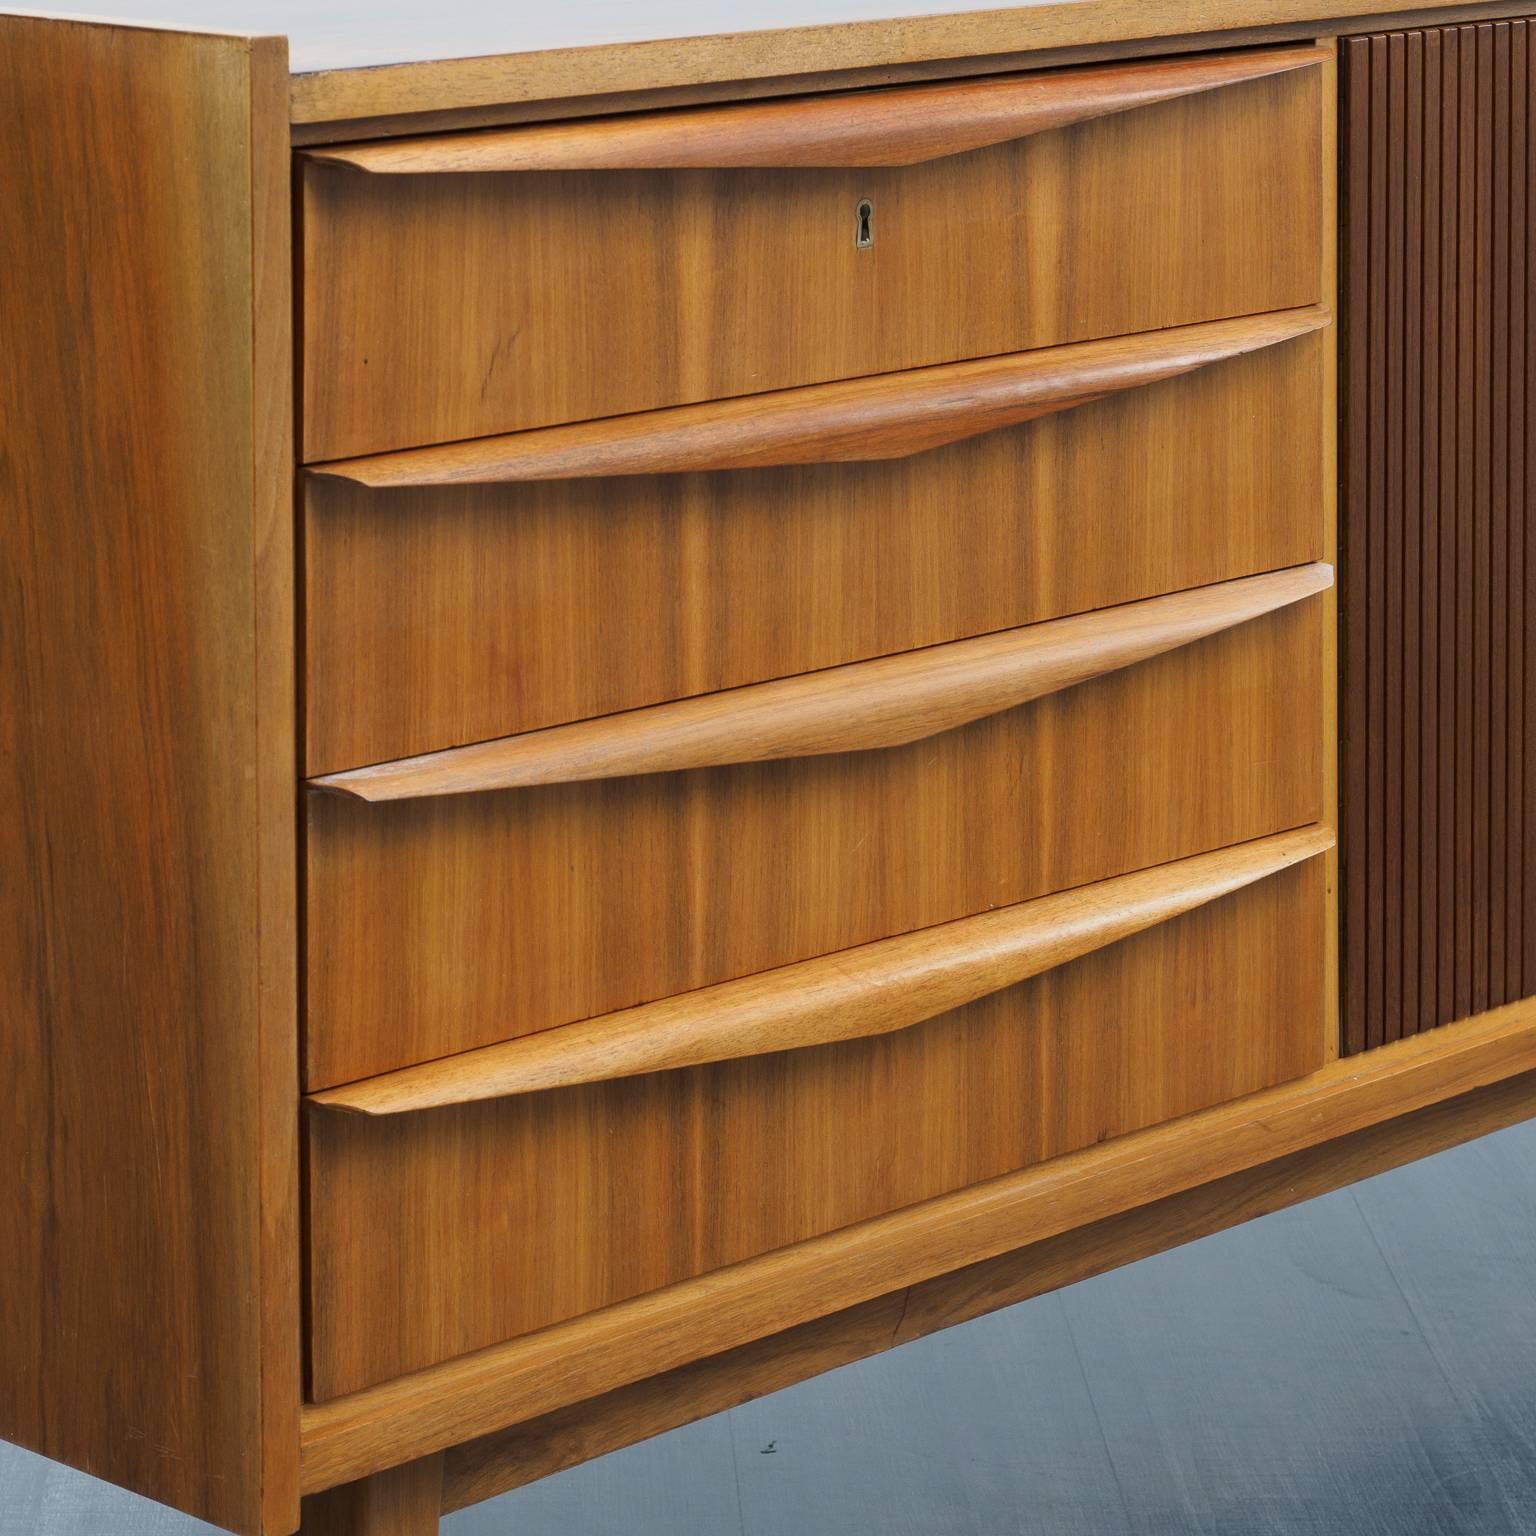 Rare 1950s sideboard with decorative structured doors. The appearance is compact and the board comes in the highly sought after length: 189cm. The sideboard is made detailed throughout with beautiful, molded solid wood-handles on the four drawers.